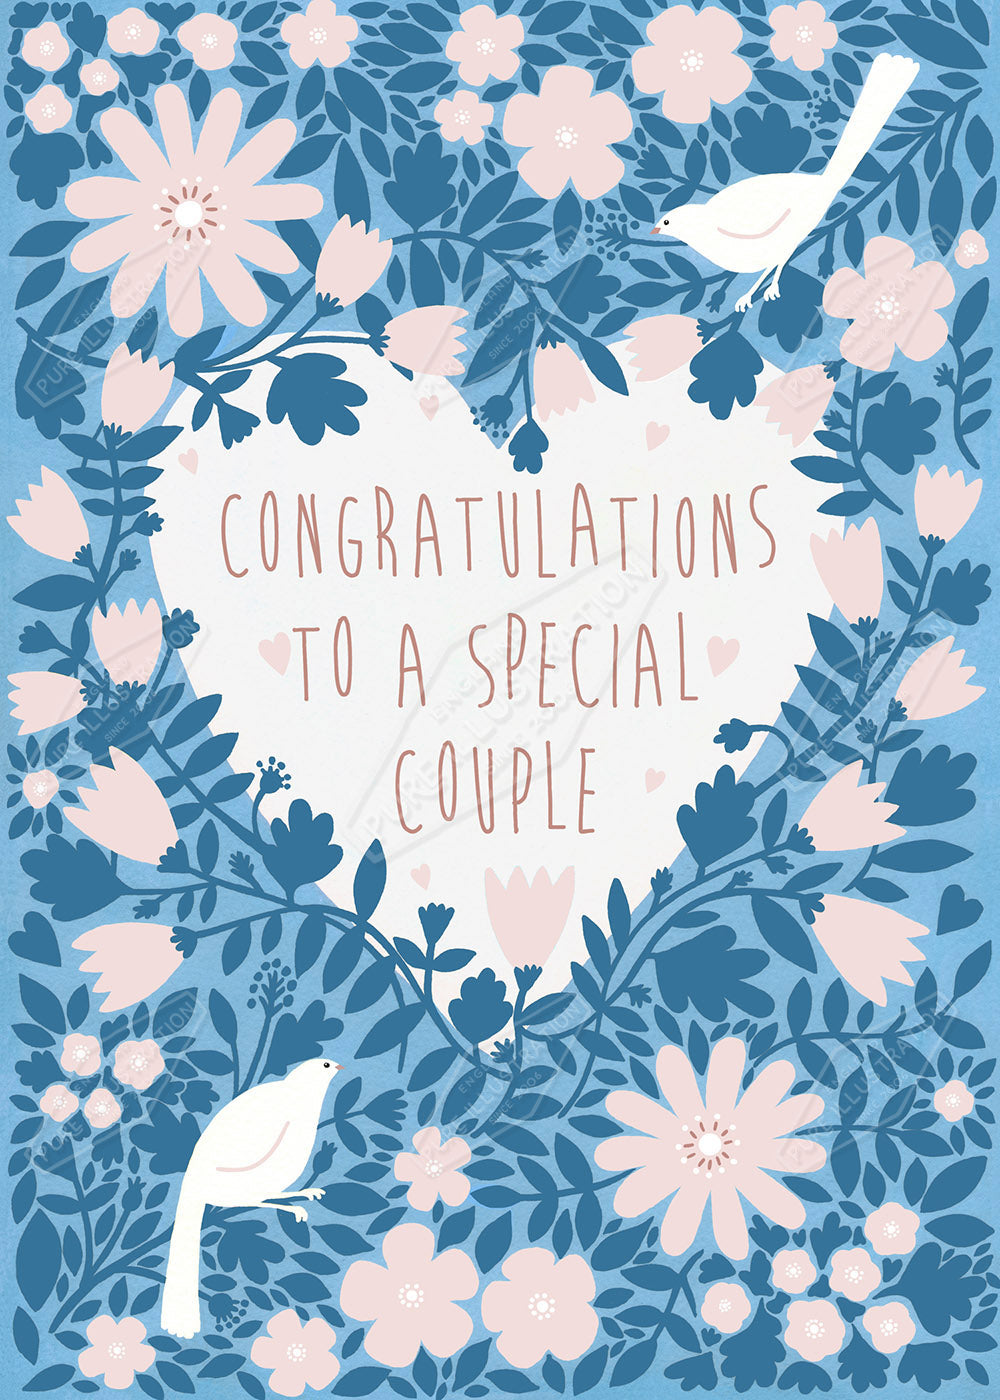 00029341SSN- Sian Summerhayes is represented by Pure Art Licensing Agency - Wedding Greeting Card Design